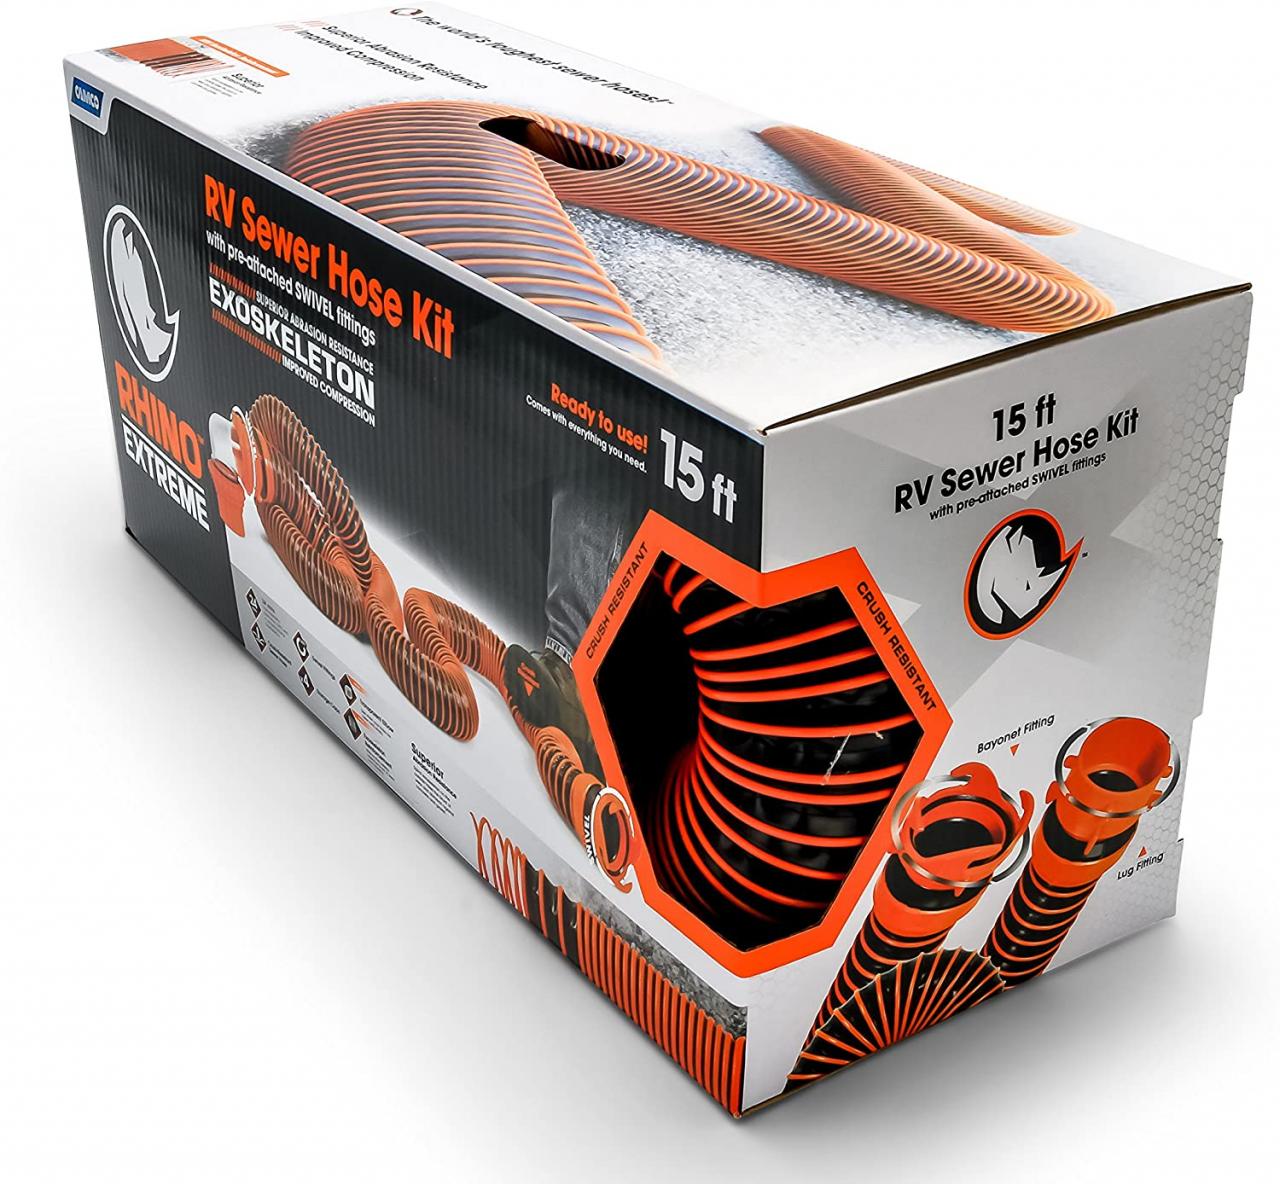 Buy Camco RhinoEXTREME 15ft RV Sewer Hose Kit, Includes Swivel Fitting and  Translucent Elbow with 4-In-1 Dump Station Fitting, Crush Resistant,  Storage Caps Included - 39861 Online in Hong Kong. B004804NWE